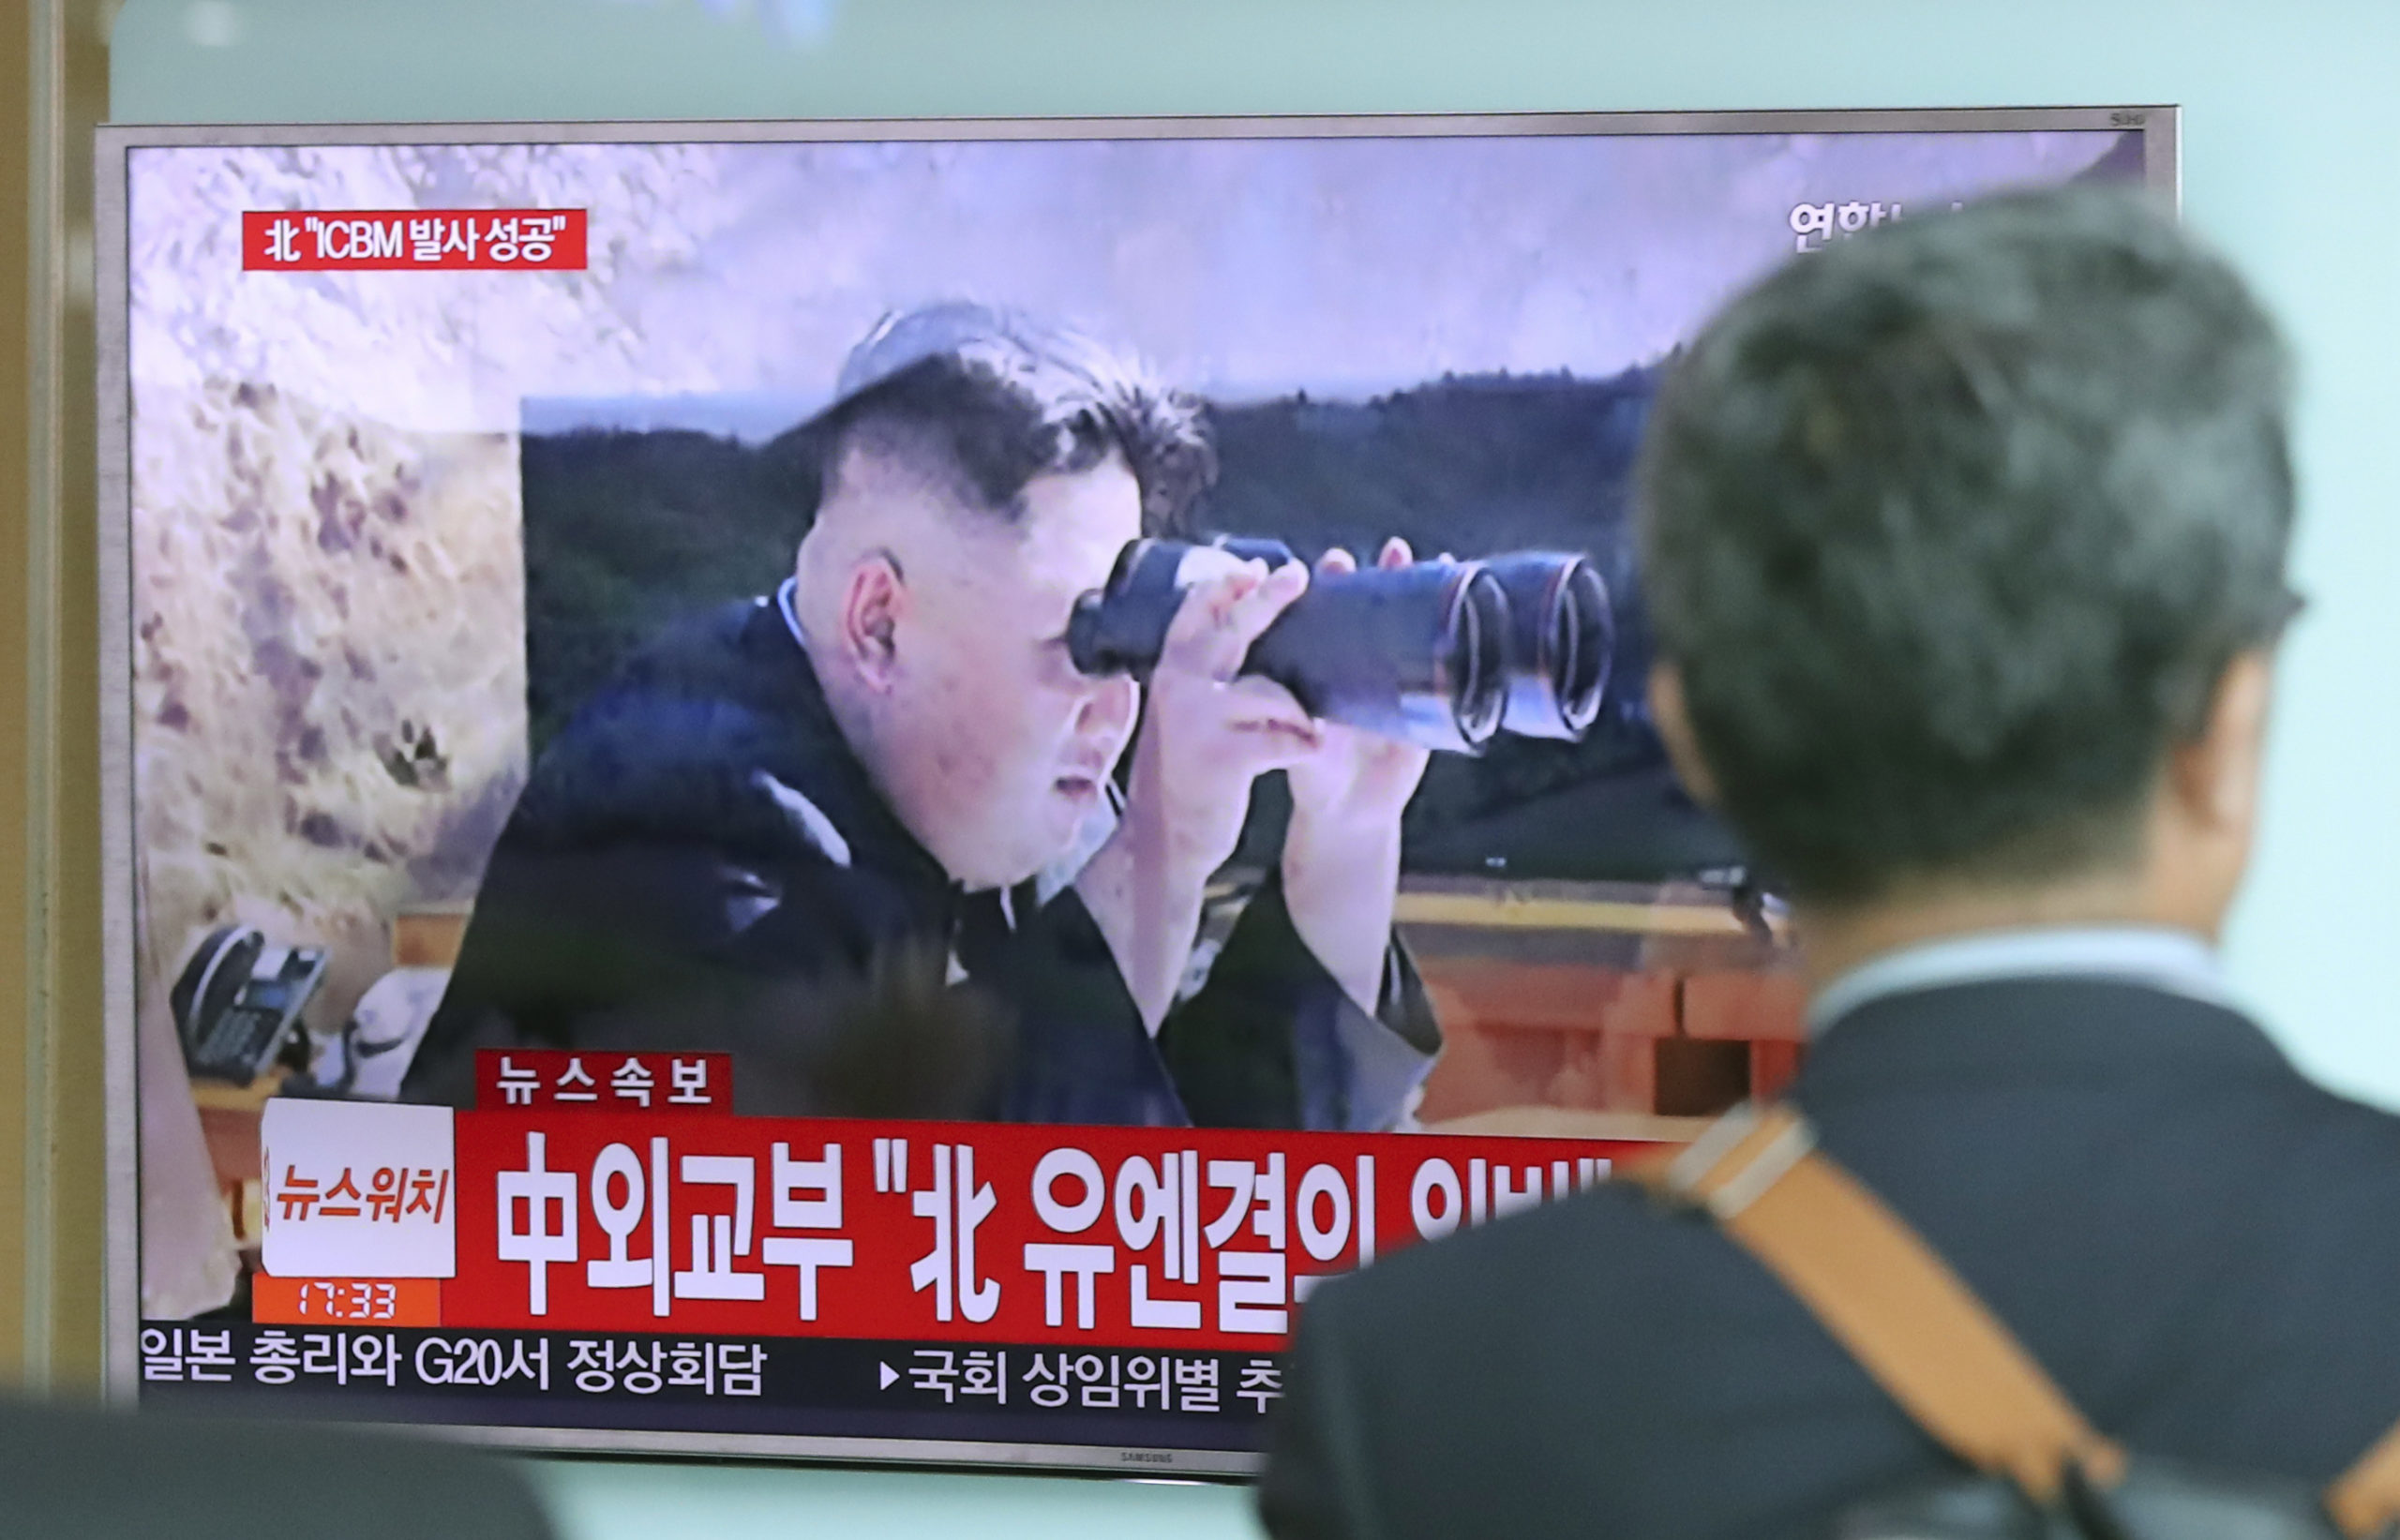 North Korea Claims Successful Test Of Intercontinental Missile